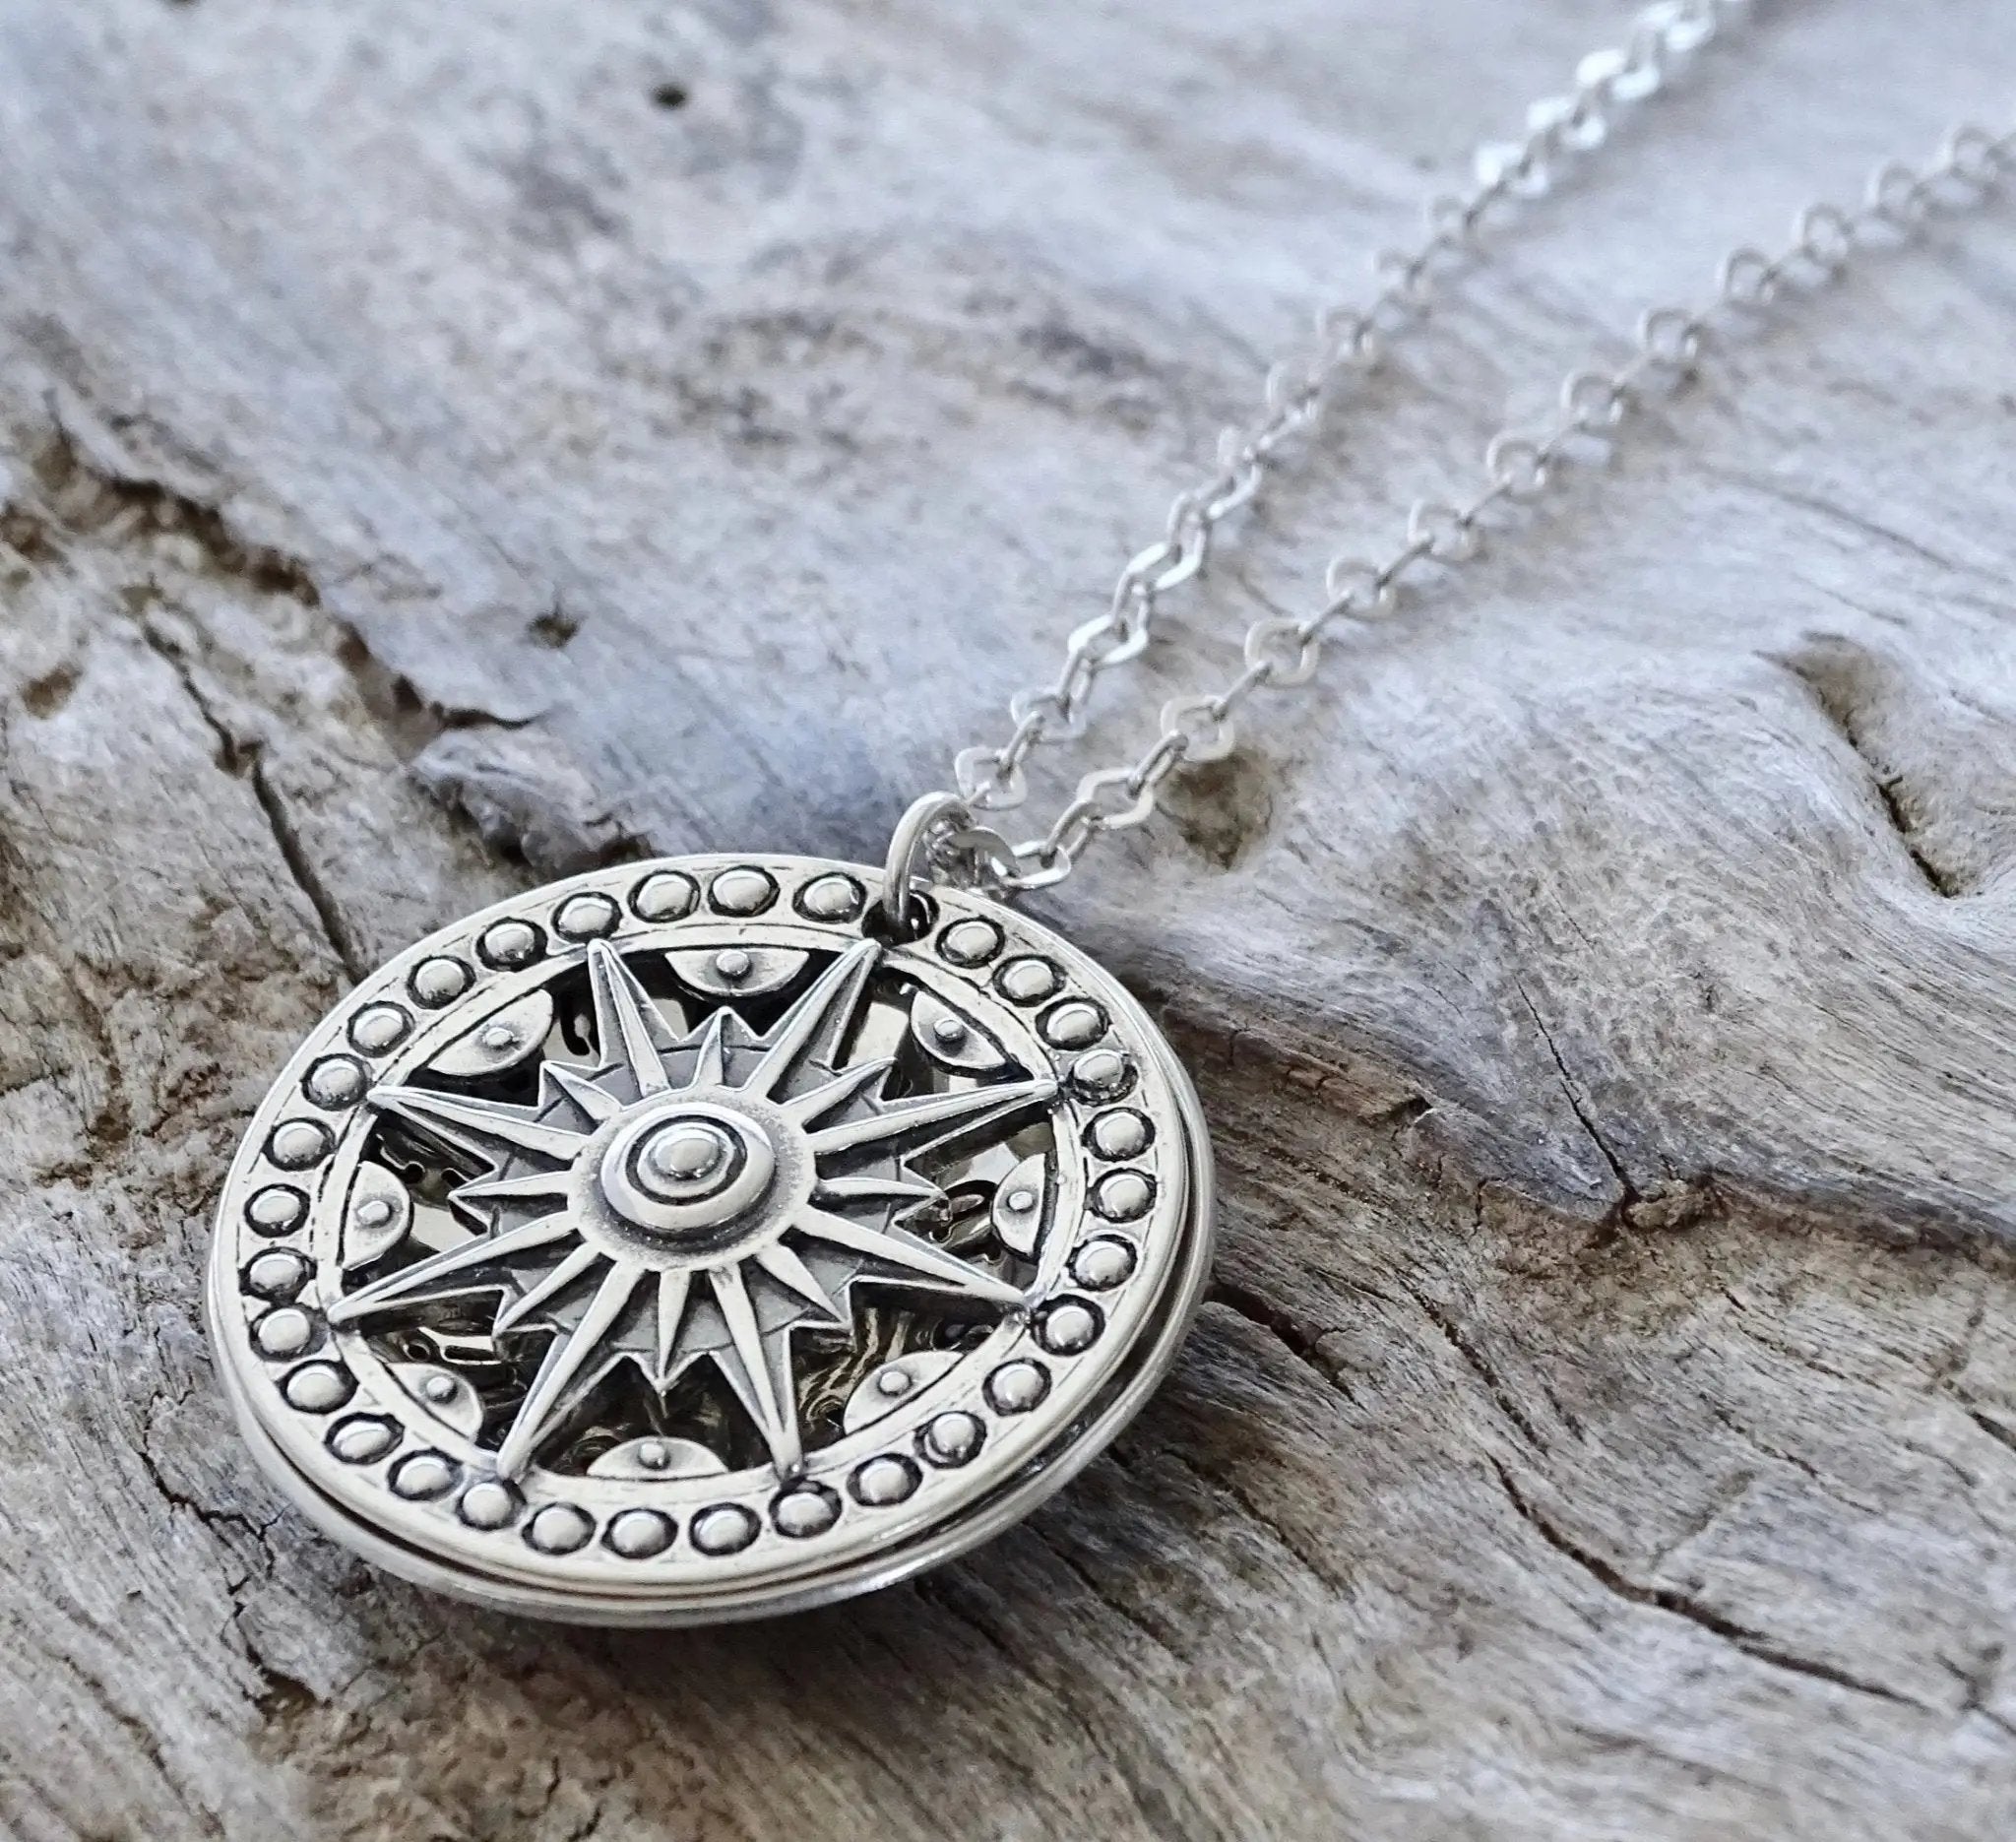 Engraved personalized silver compass custom gift for him, valentine gift,  love | eBay